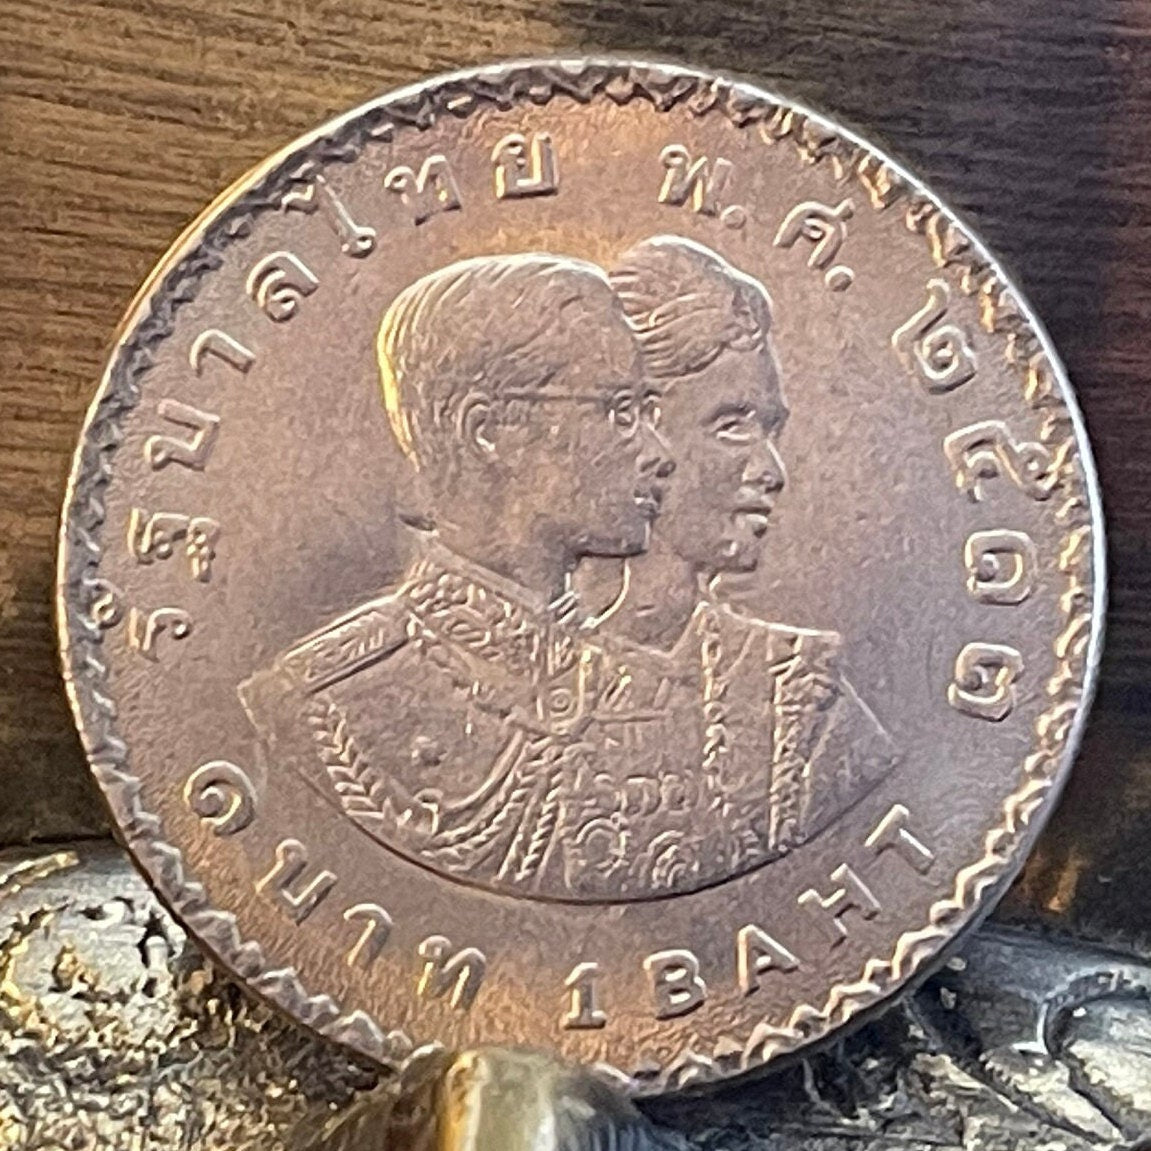 Royal Couple King Bhumibol and Queen Sirikit 1 Baht Thailand Authentic Coin Money for Jewelry (Asian Games) (1970) (Bangkok) (Ever Onward)